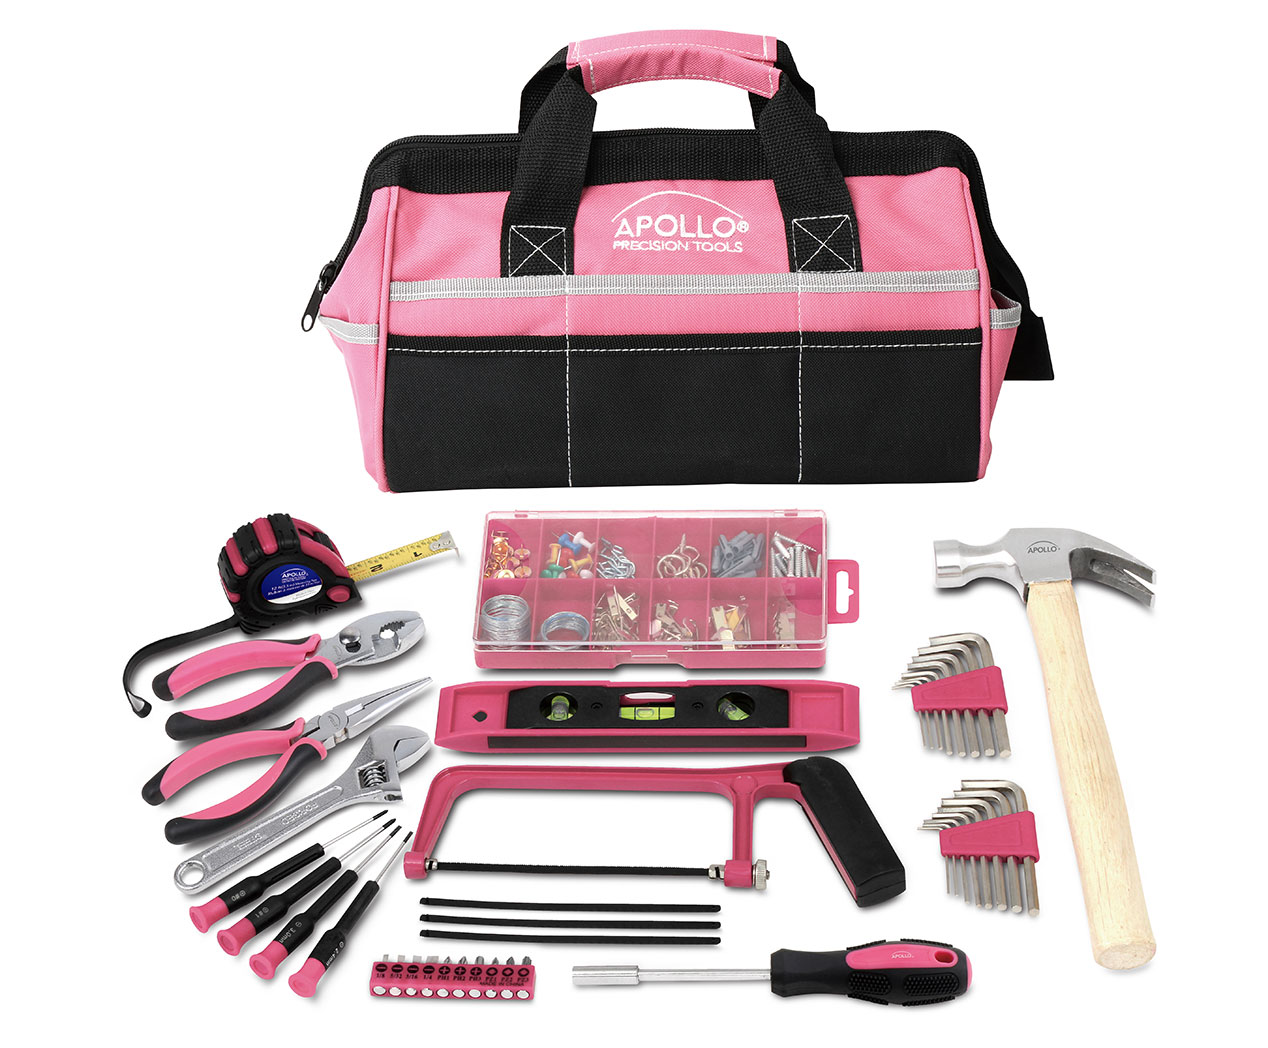 Household Tool Kit 135-Piece Pink Product Dimensions: 10 x 14 x 3 inches Donation Made to Breast Cancer Research 